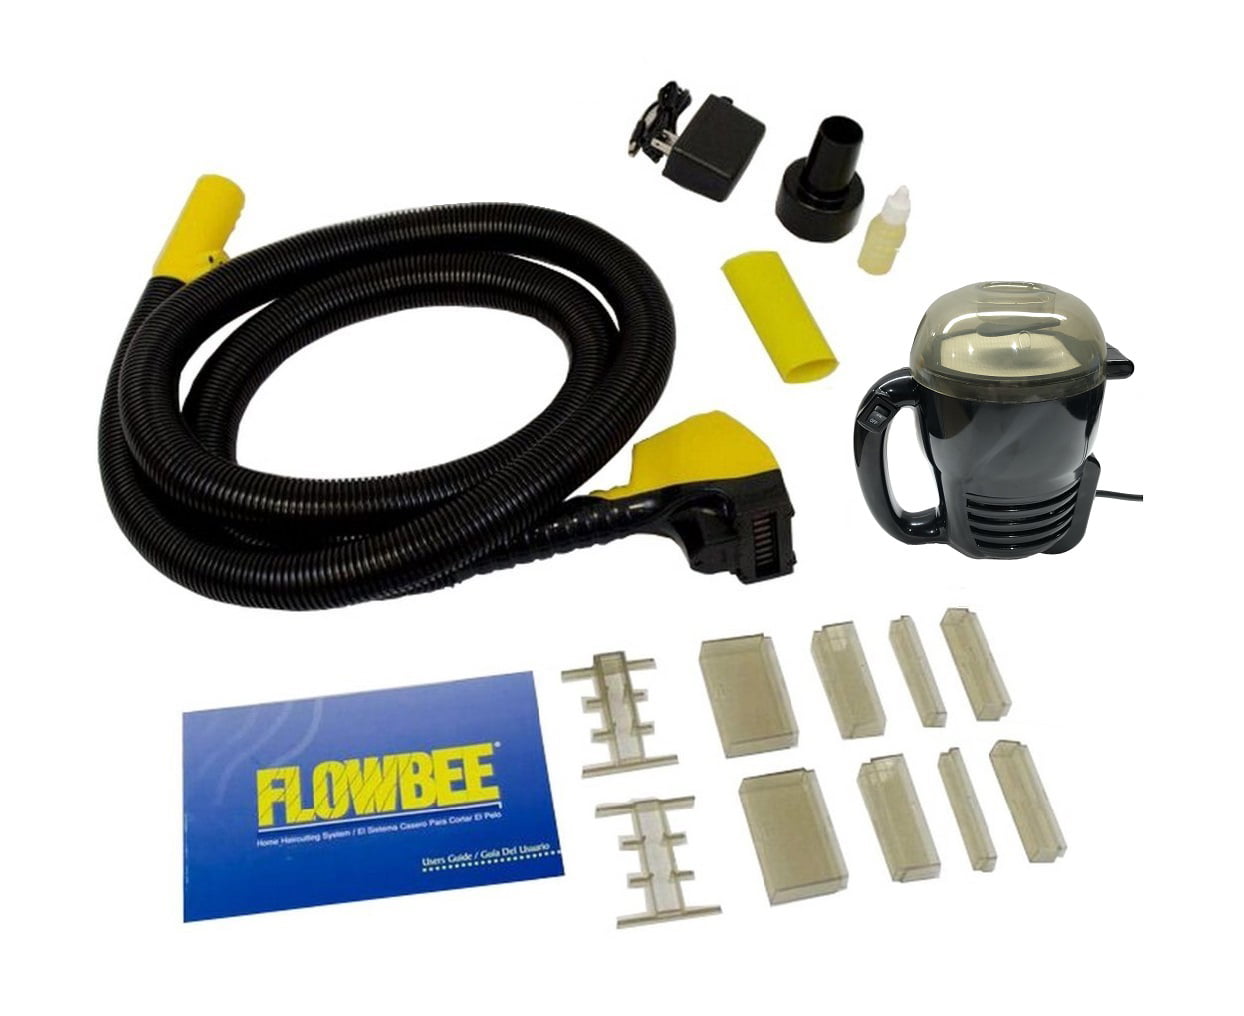 flowbee blade replacement instructions